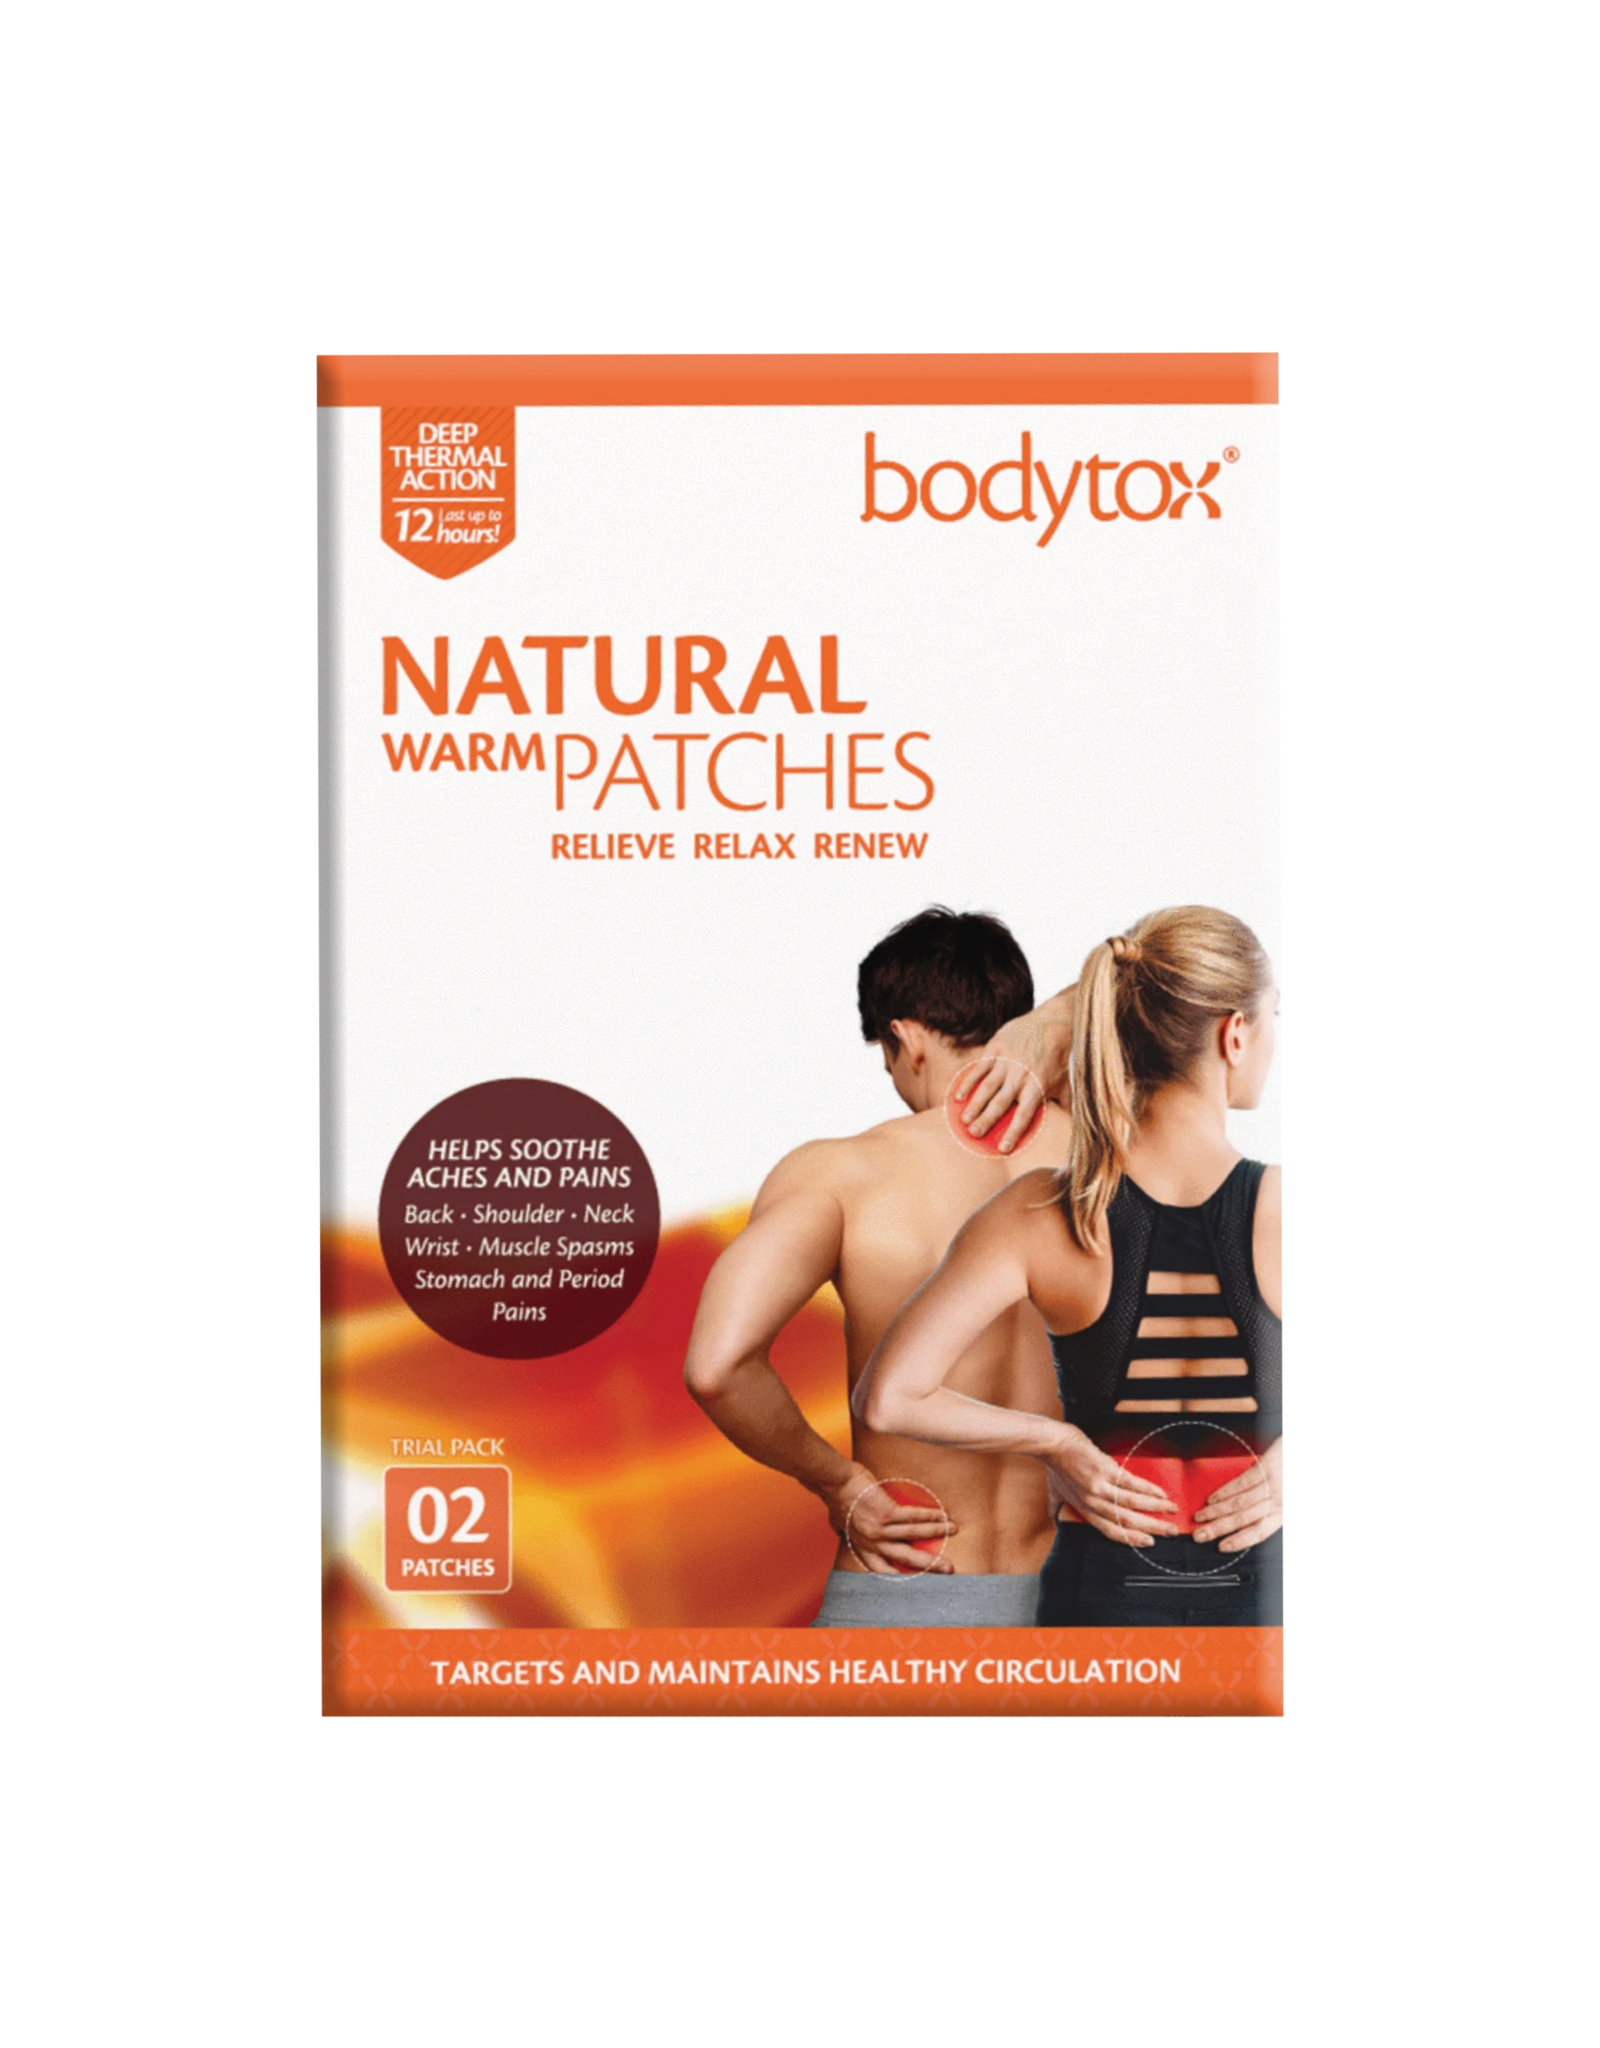 Bodytox Natural Warm Patches